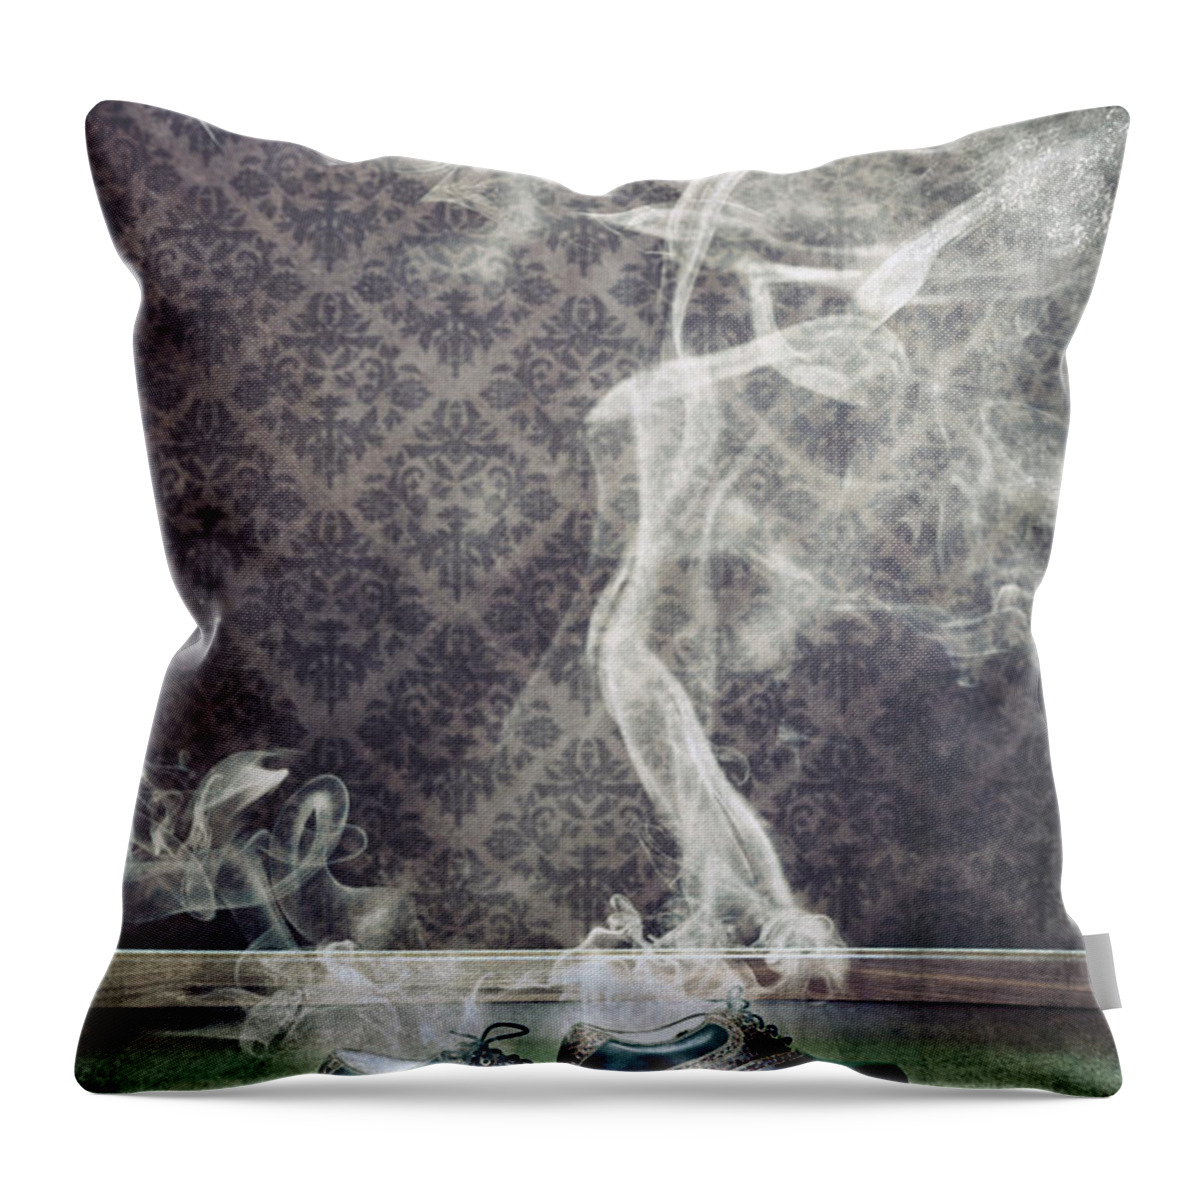 Shoe Throw Pillow featuring the photograph Smoky Shoes by Joana Kruse